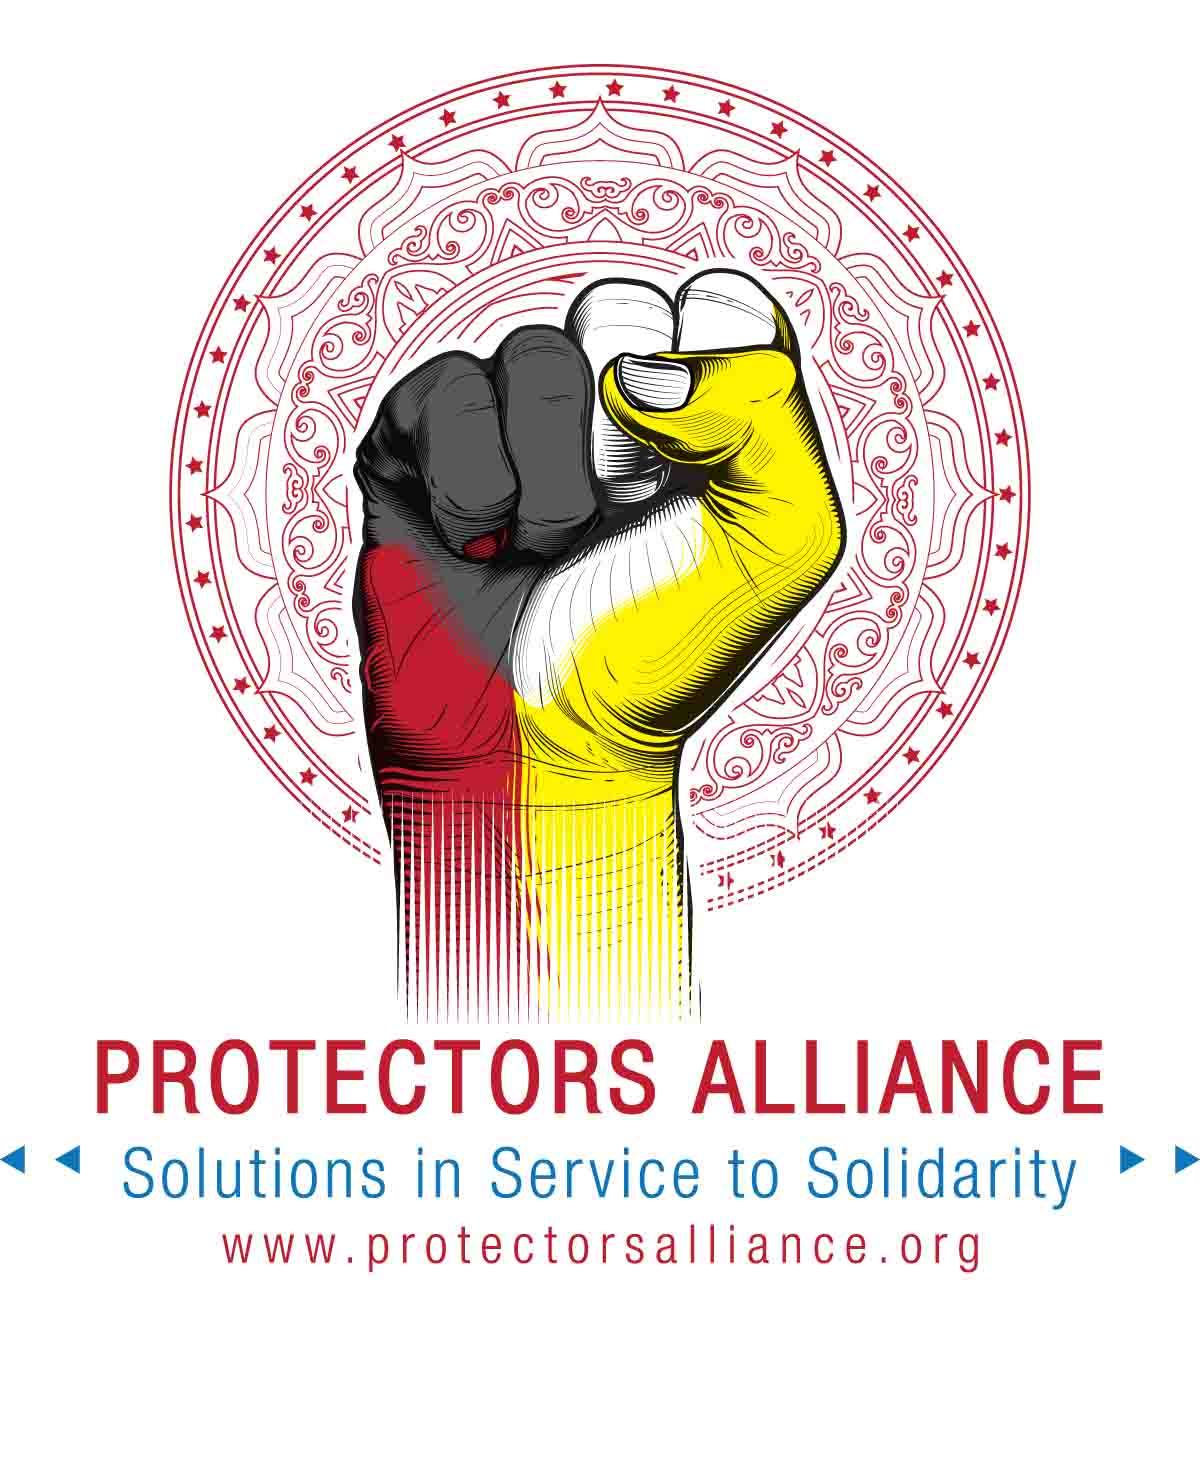 Logo created for Protectors Alliance by Mugwort Designs